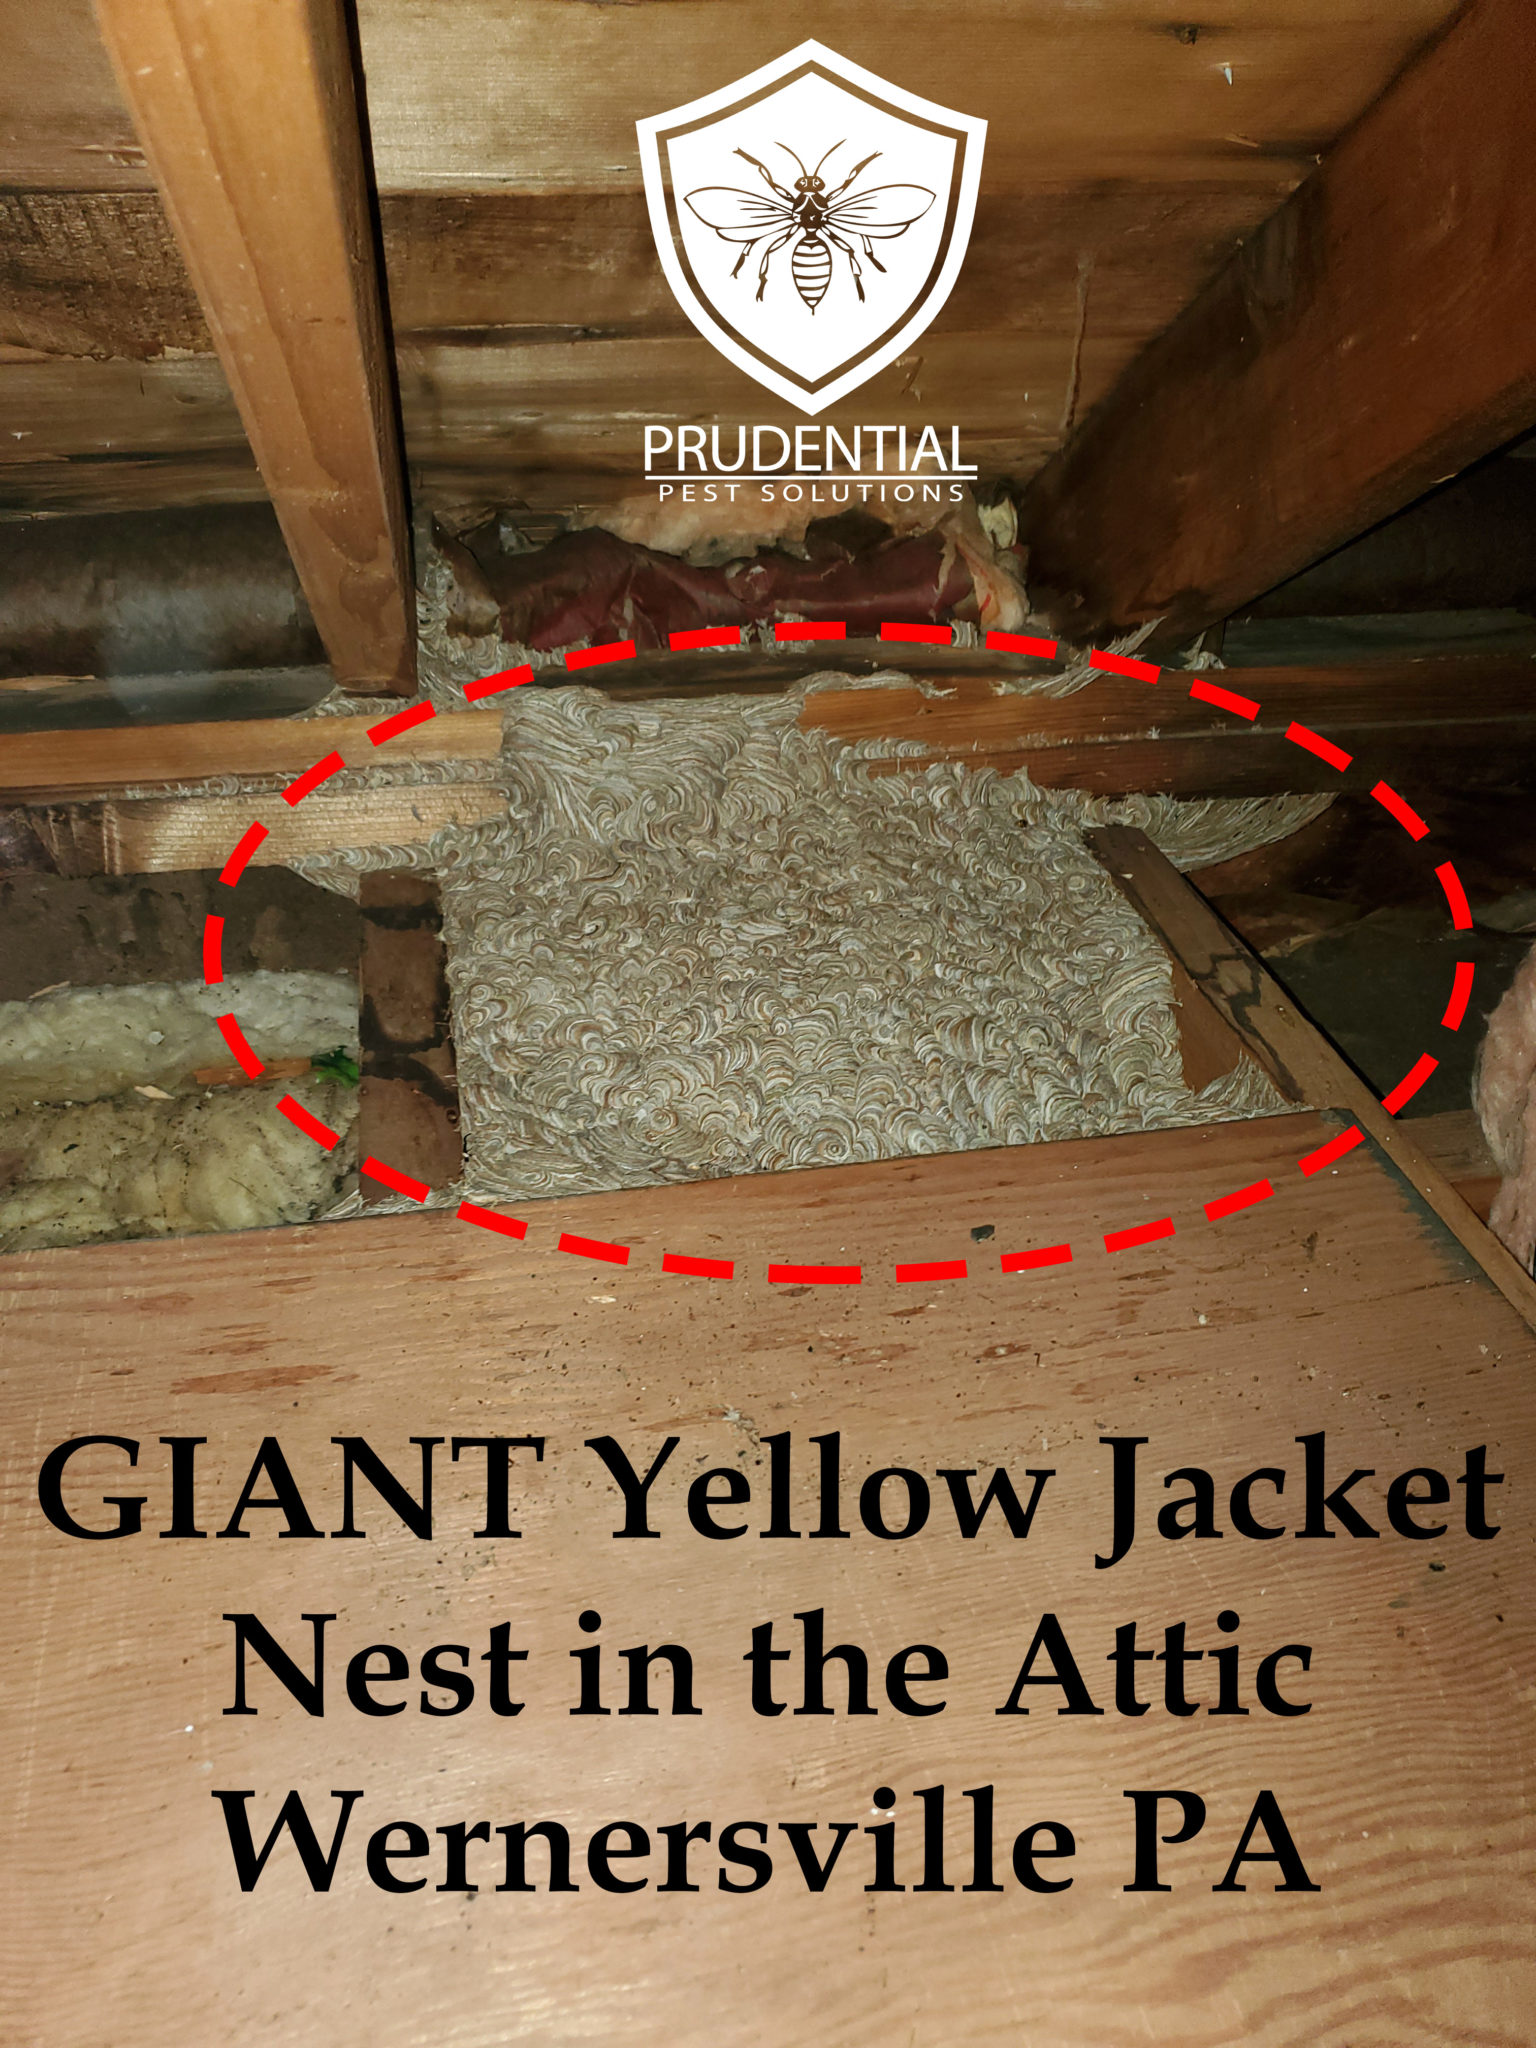 GIANT Yellow Jacket Nest in the Attic in Wernersville PA